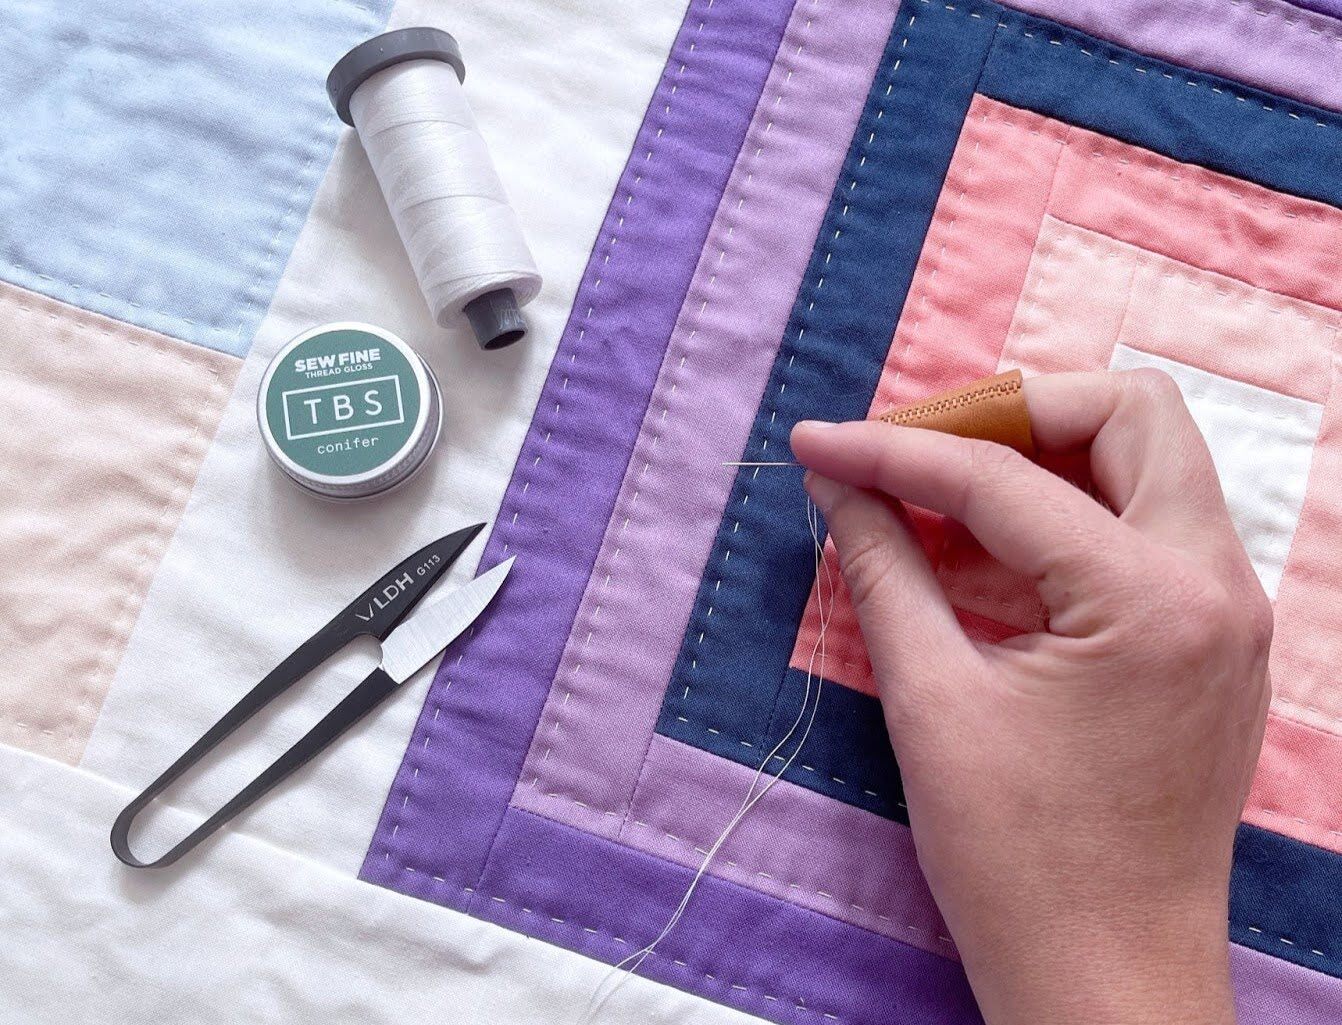 “Wheezy Rider”: A Quilt Pattern For Relaxation And Breath Work